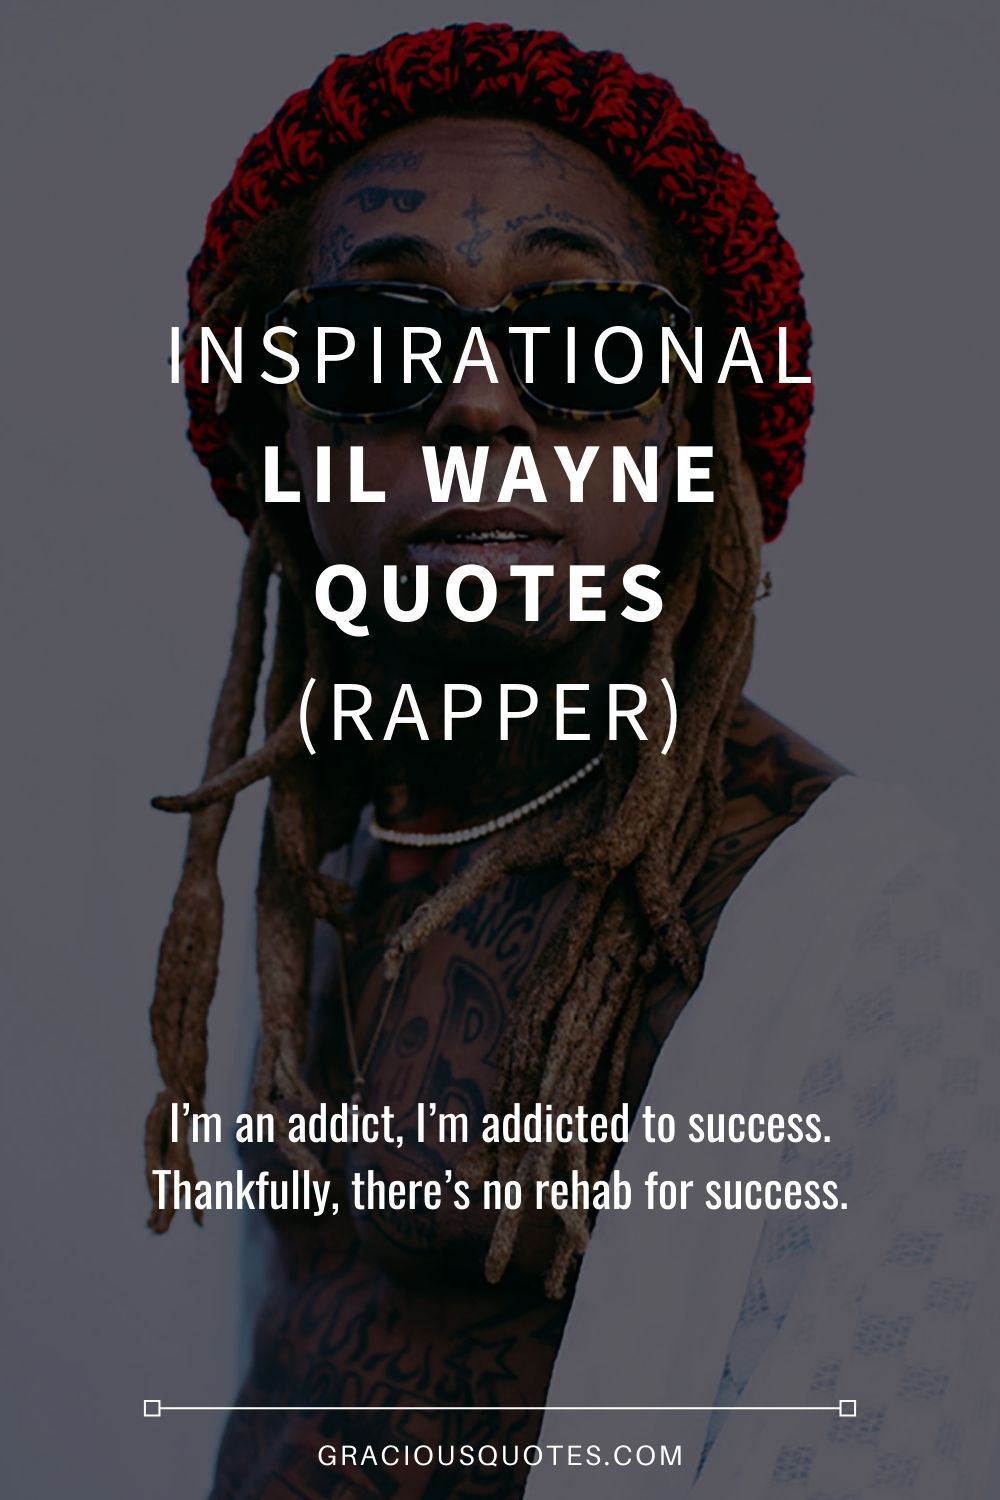 lil wayne quotes and sayings about life